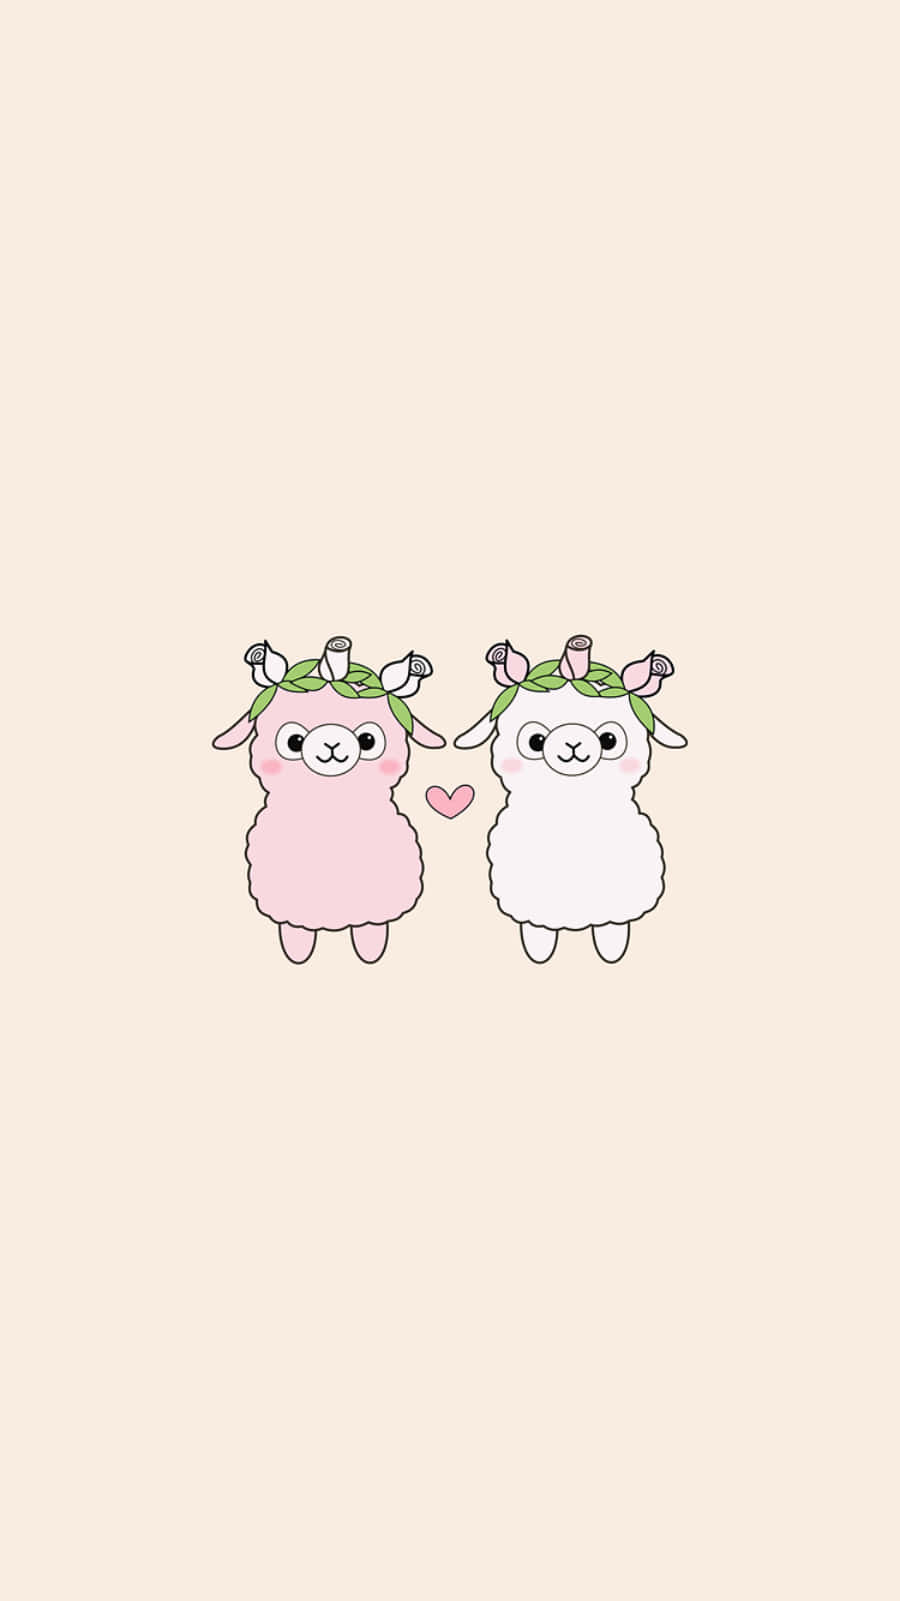 Two Cute Llamas With Flowers On Their Heads Wallpaper